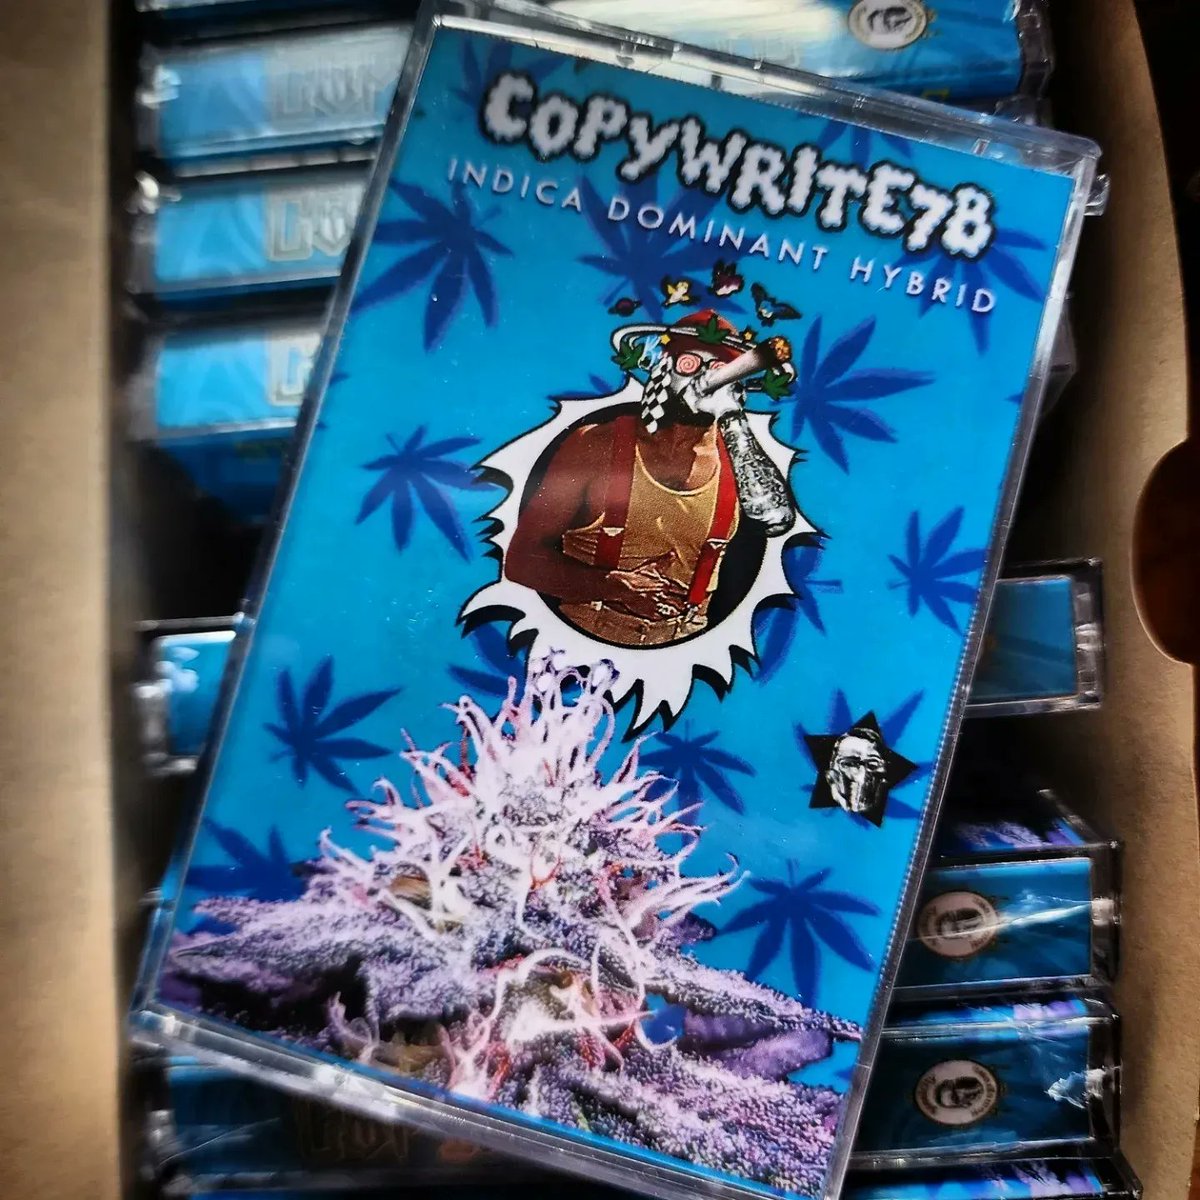 Available at steelcityhomegrown.com 

#copywrite #copywrite78 #steelcityhomegrown #therealsteelcity #steelcity #breeder #grow #grower #phenohunt #roots #flower #genetics  #deepwaterculture #hydroponics #seeds #clippings #propagate #cultivate #cultivation #craft #kraft #hashing